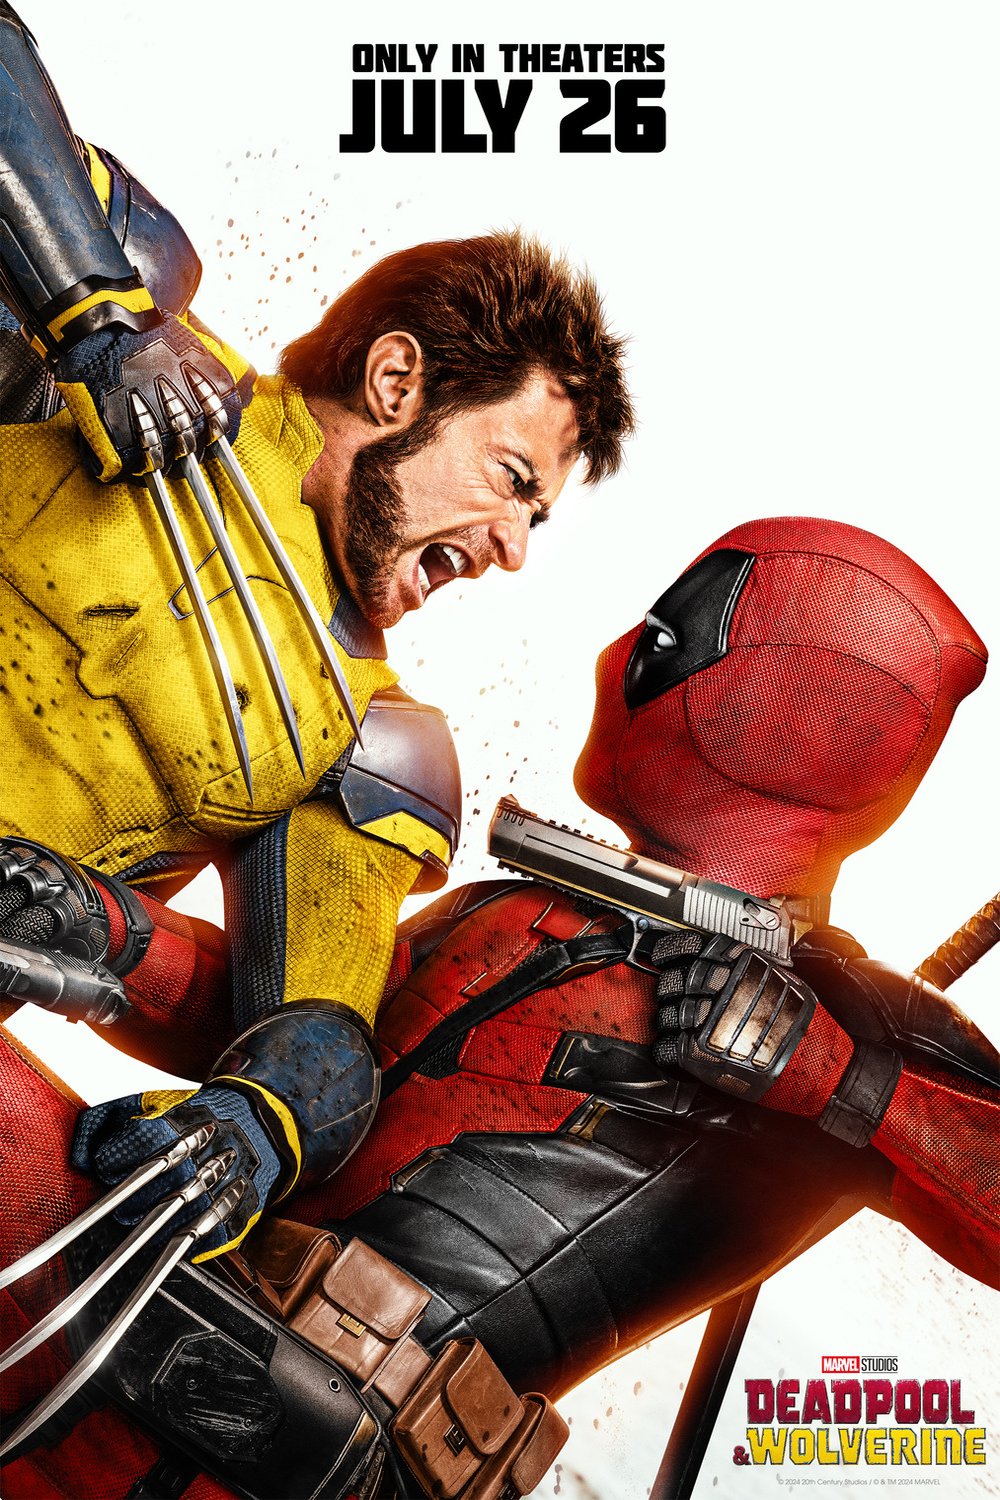 Poster of the movie Deadpool & Wolverine